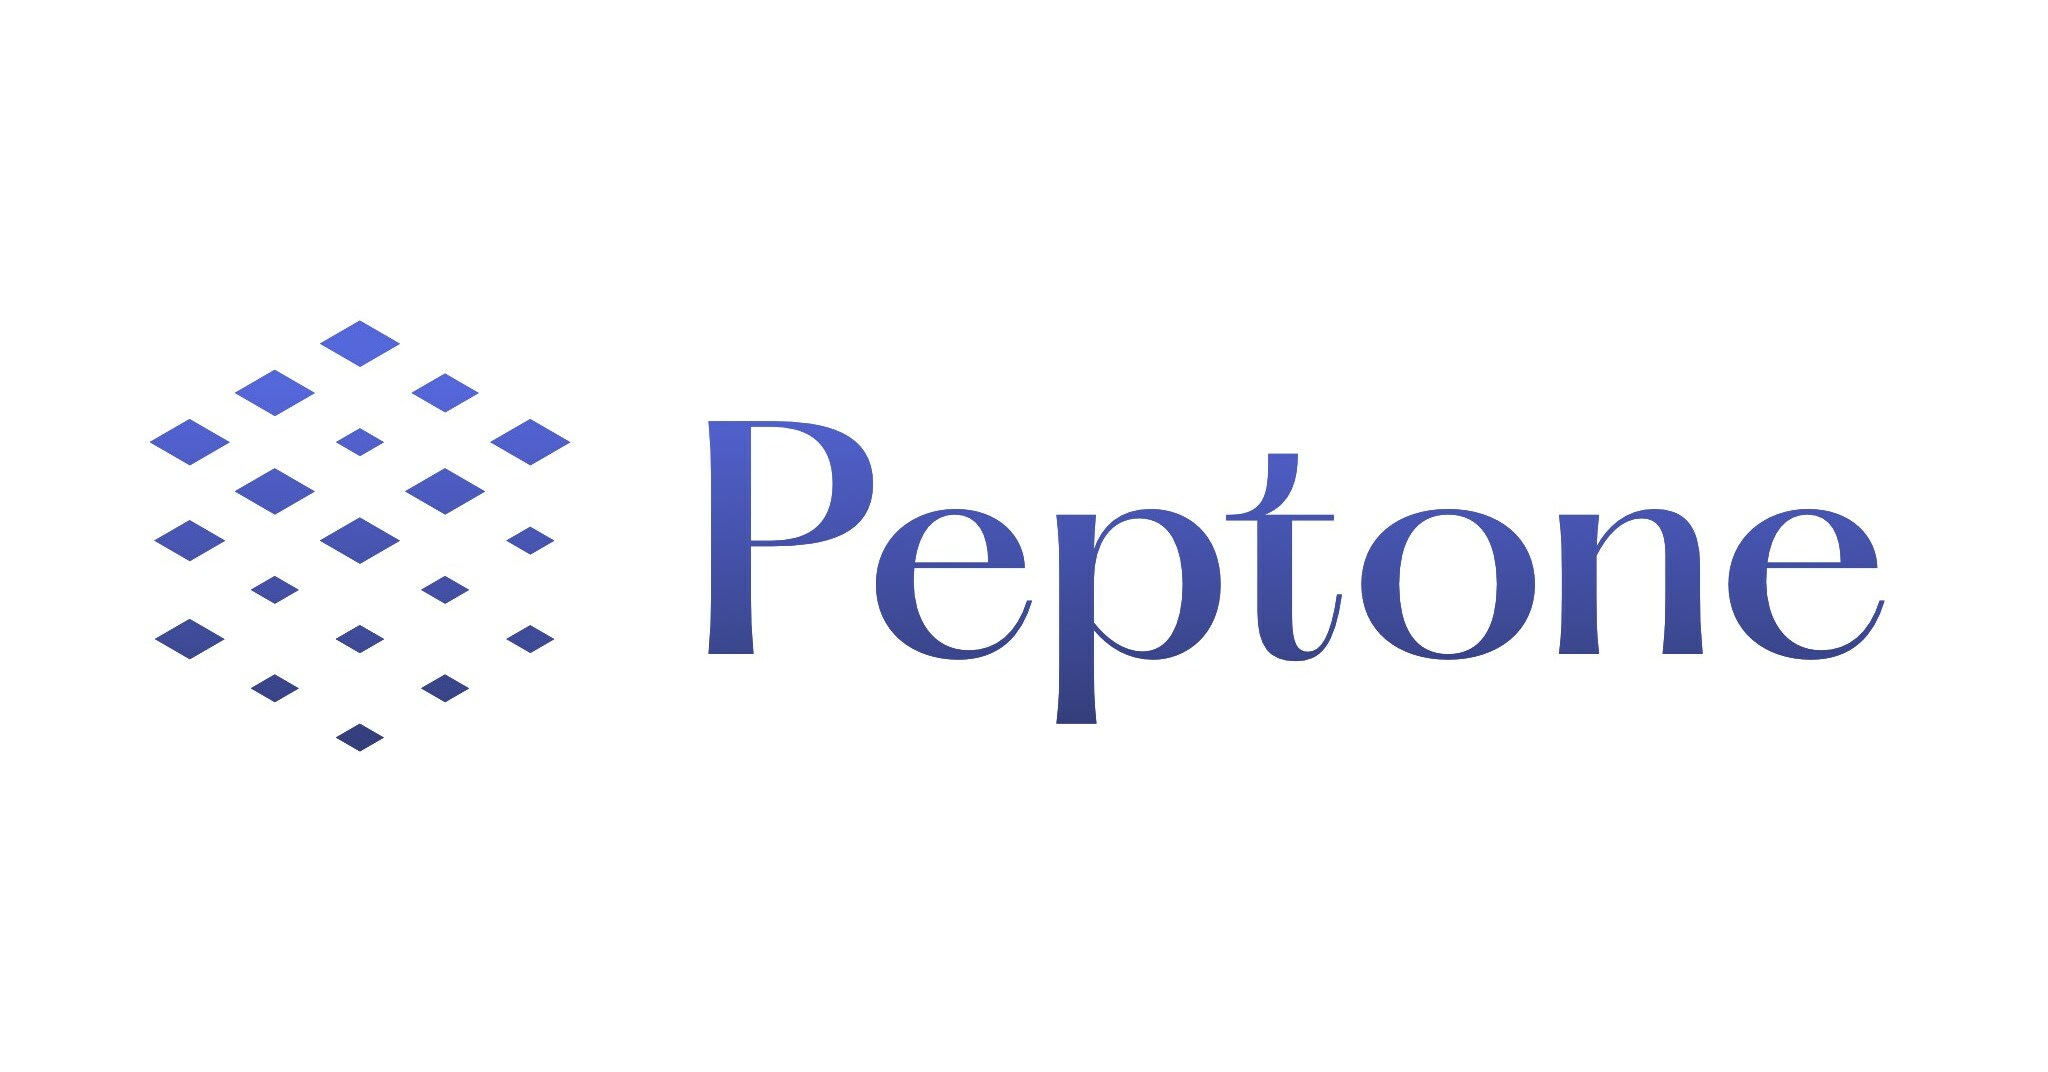 Peptone Expands Leadership Team with Key Executive Hires